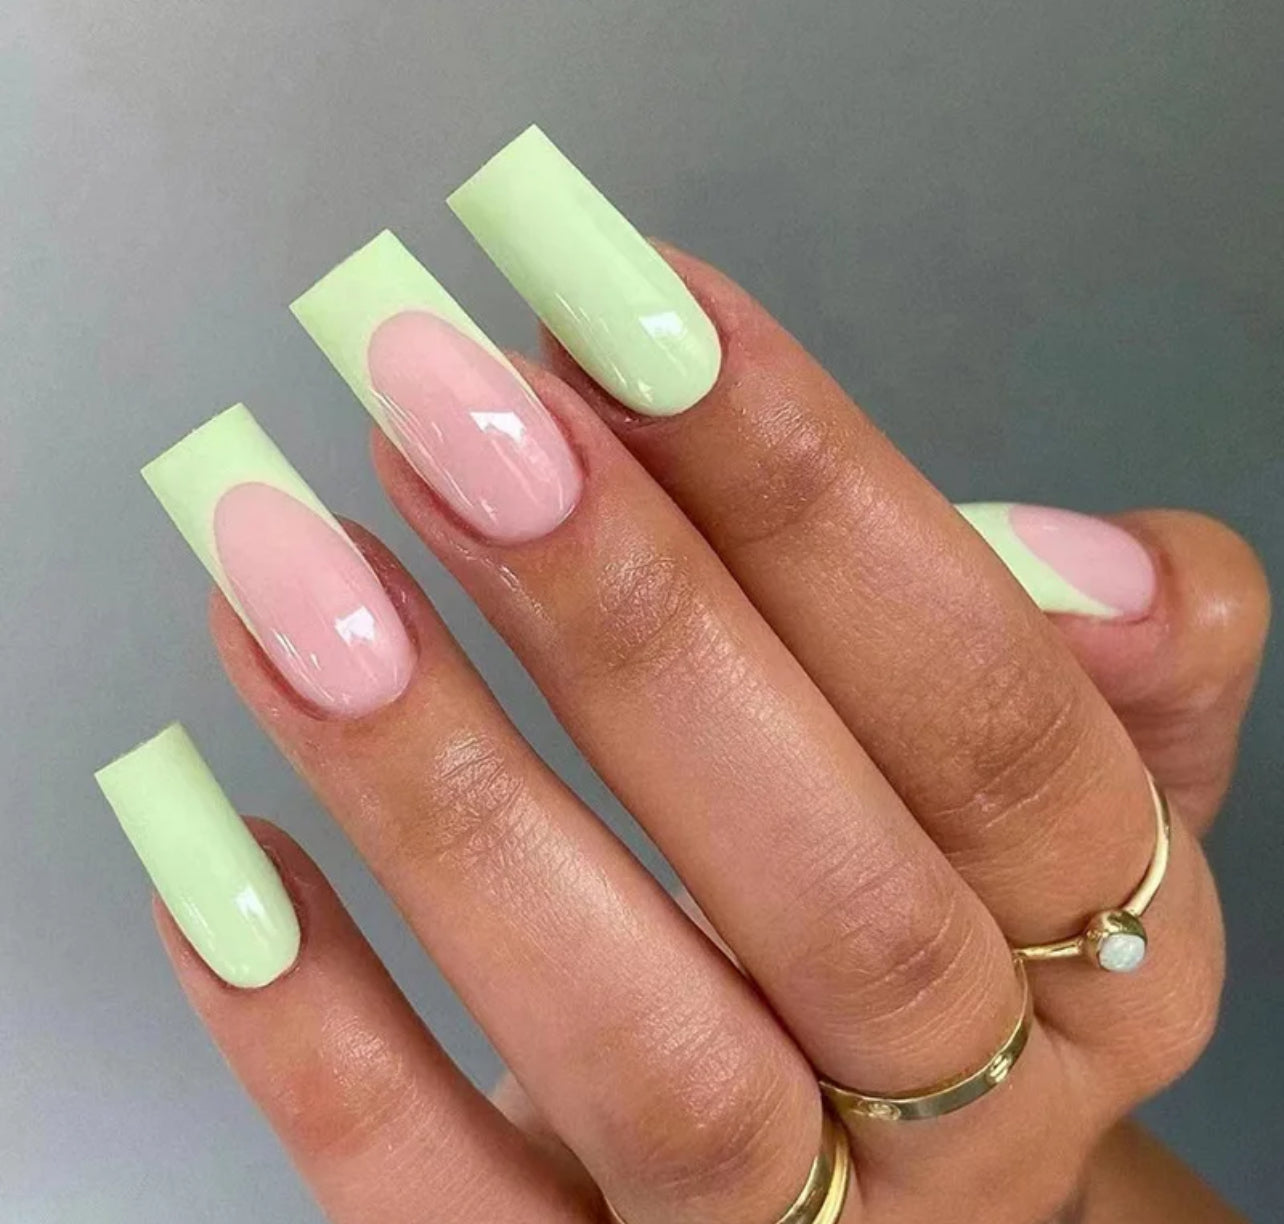 Faux-ongles